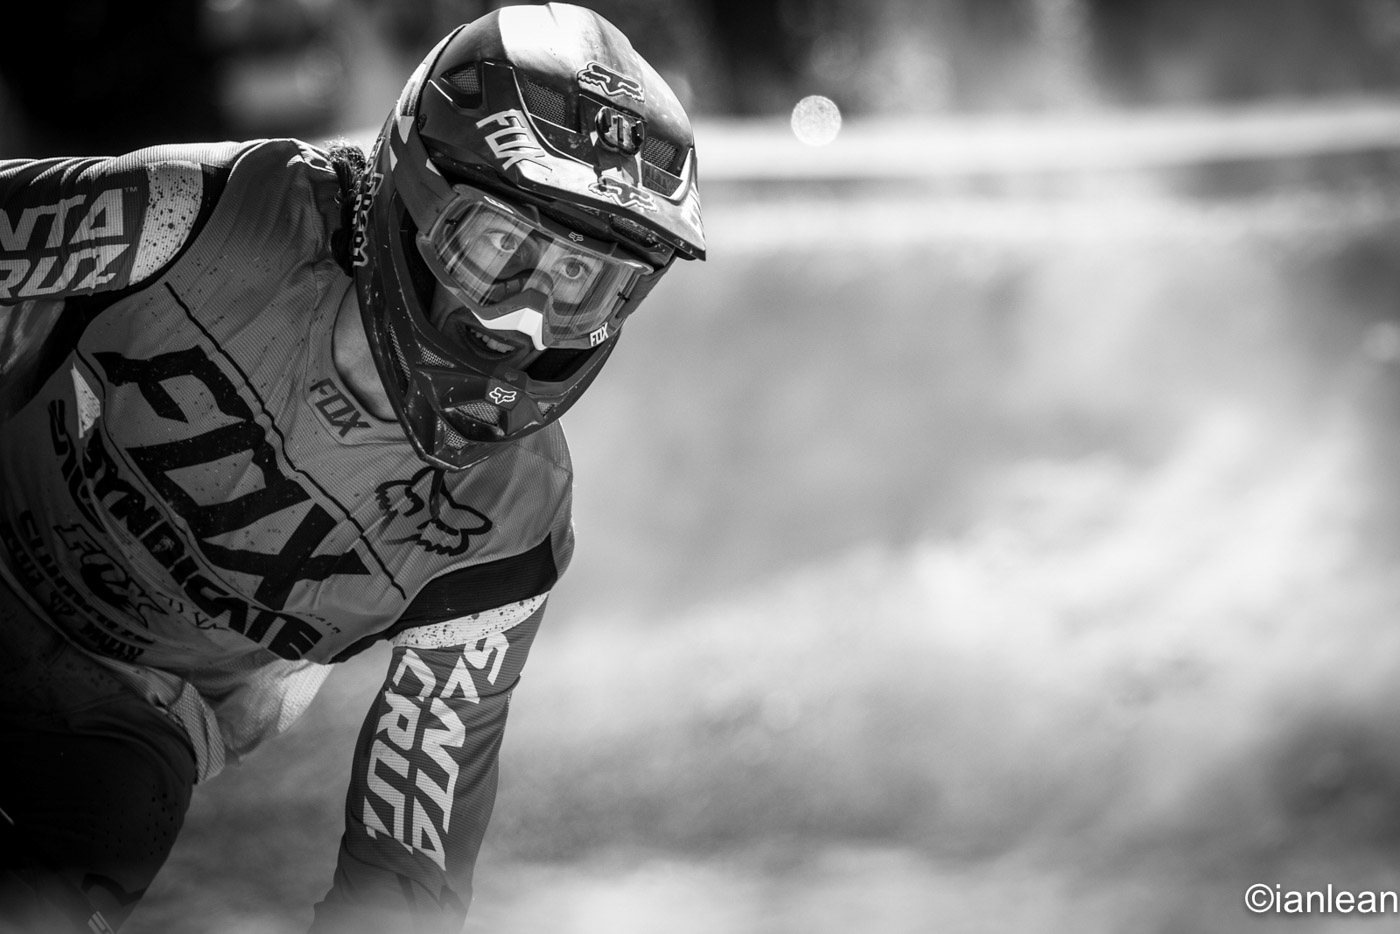 2016 Downhill national champs Wideopen (36 of 60)